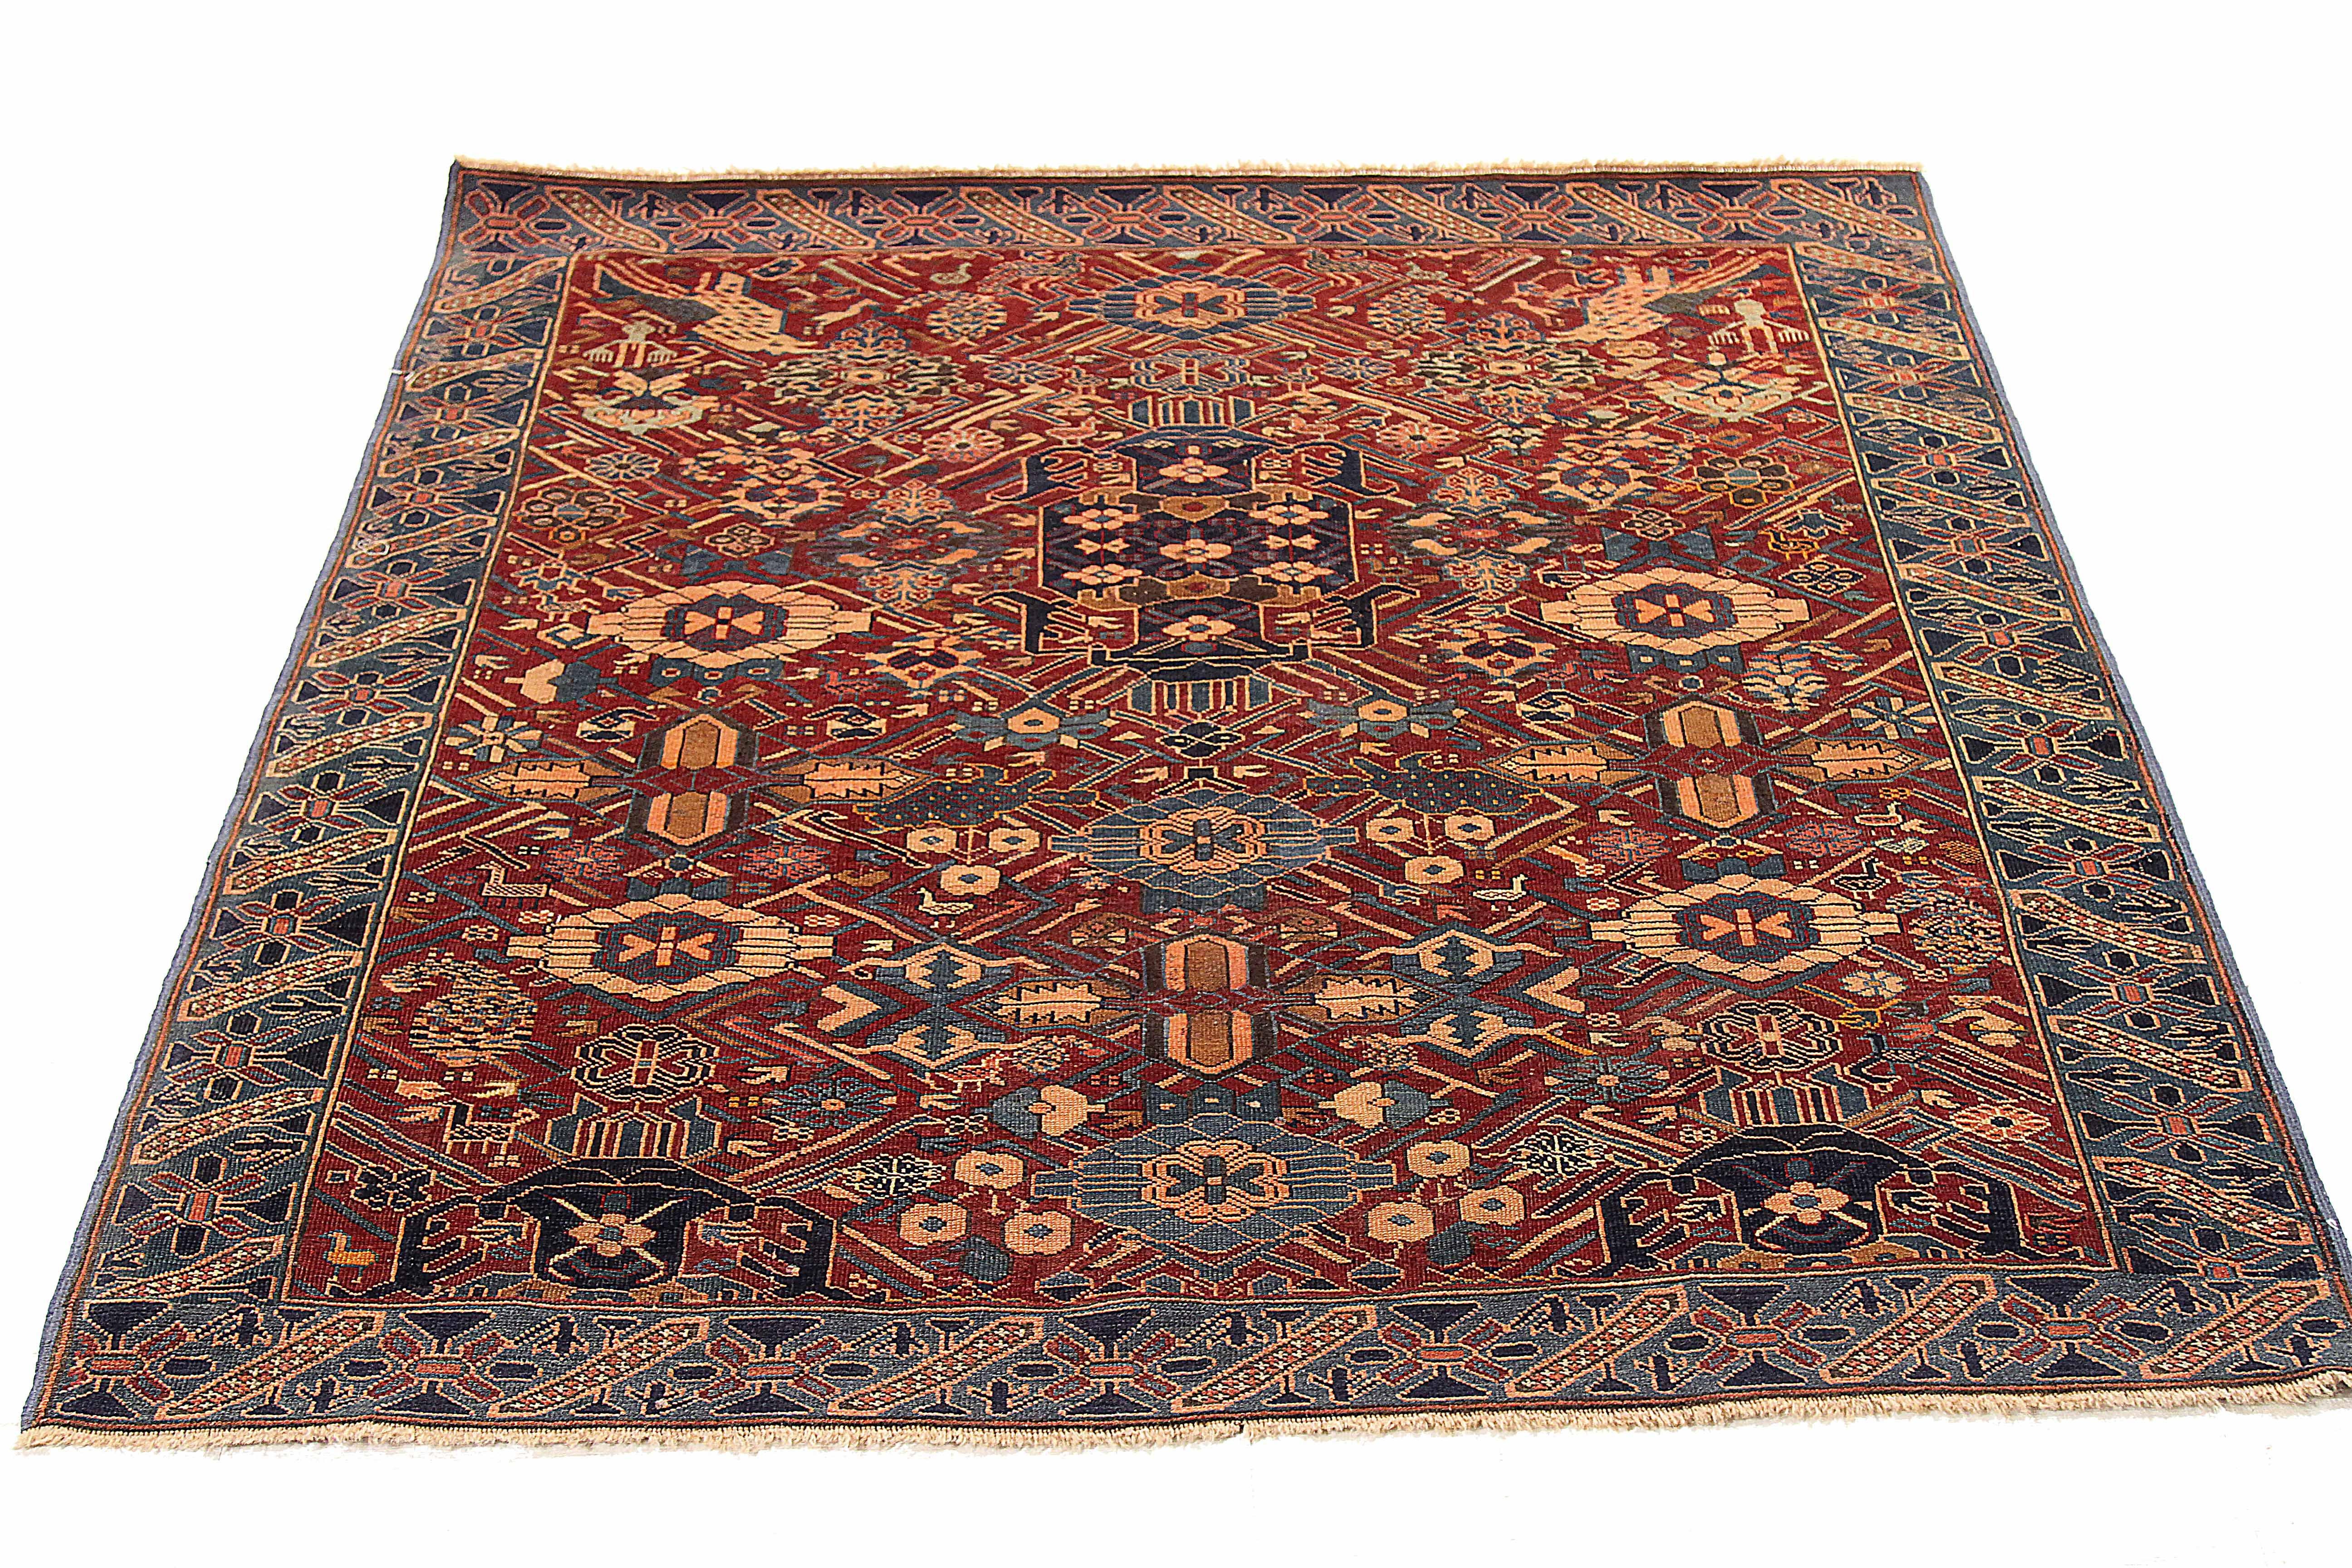 Antique Afghan square rug handwoven from the finest sheep’s wool. It’s colored with all-natural vegetable dyes that are safe for humans and pets. It’s a traditional Zikhor design handwoven by expert artisans. It’s a lovely square rug that can be